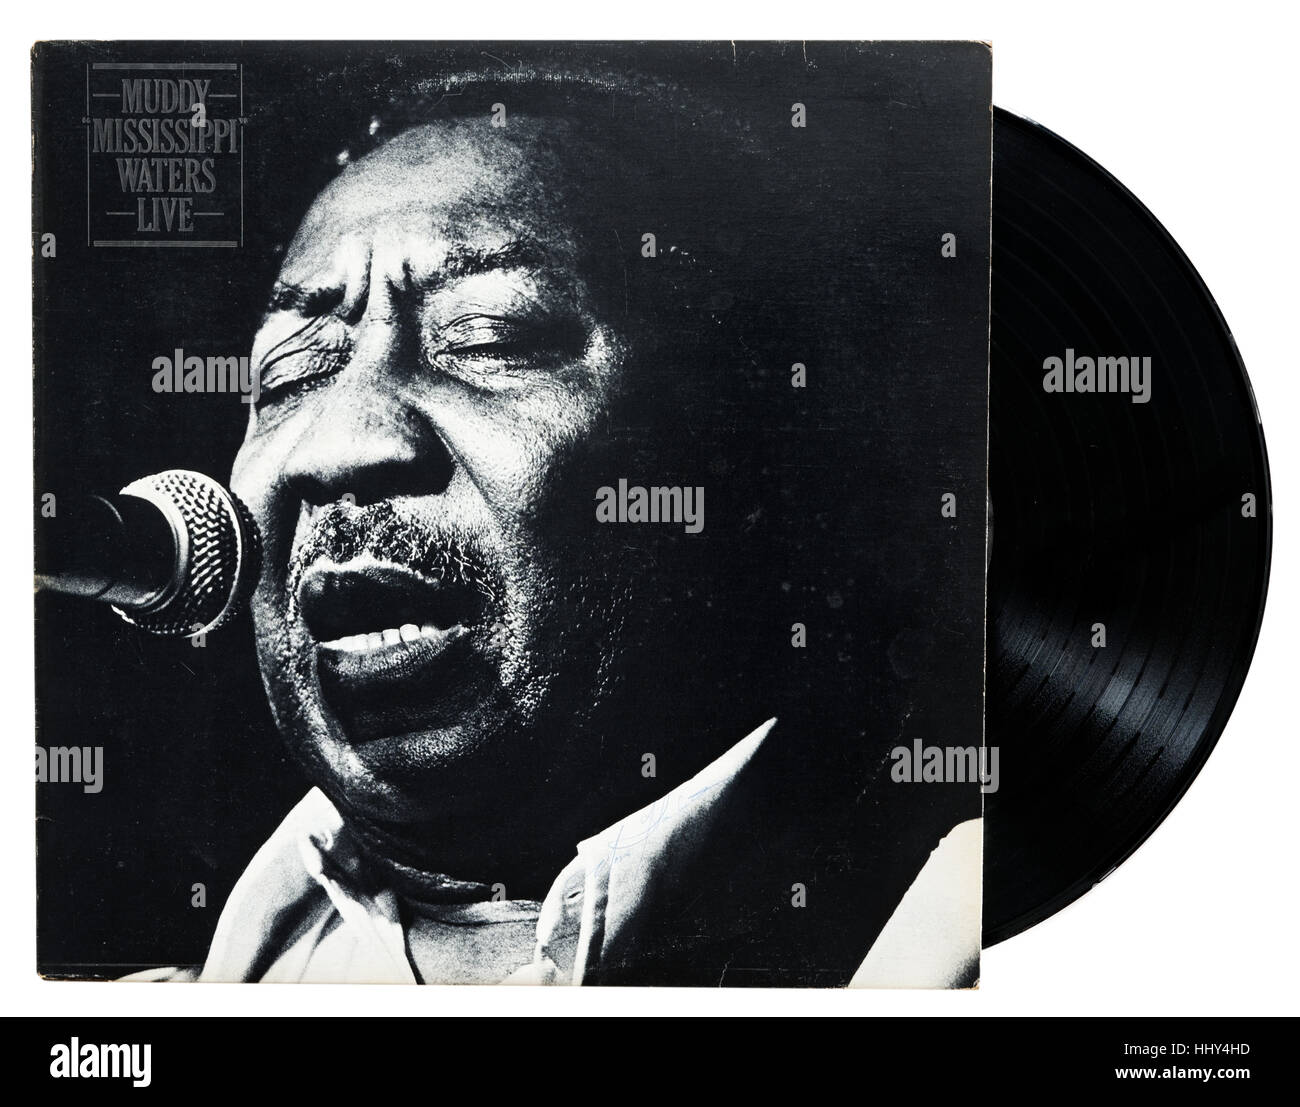 Muddy Waters Muddy album vinyle 'Mississippi' Waters Live Banque D'Images